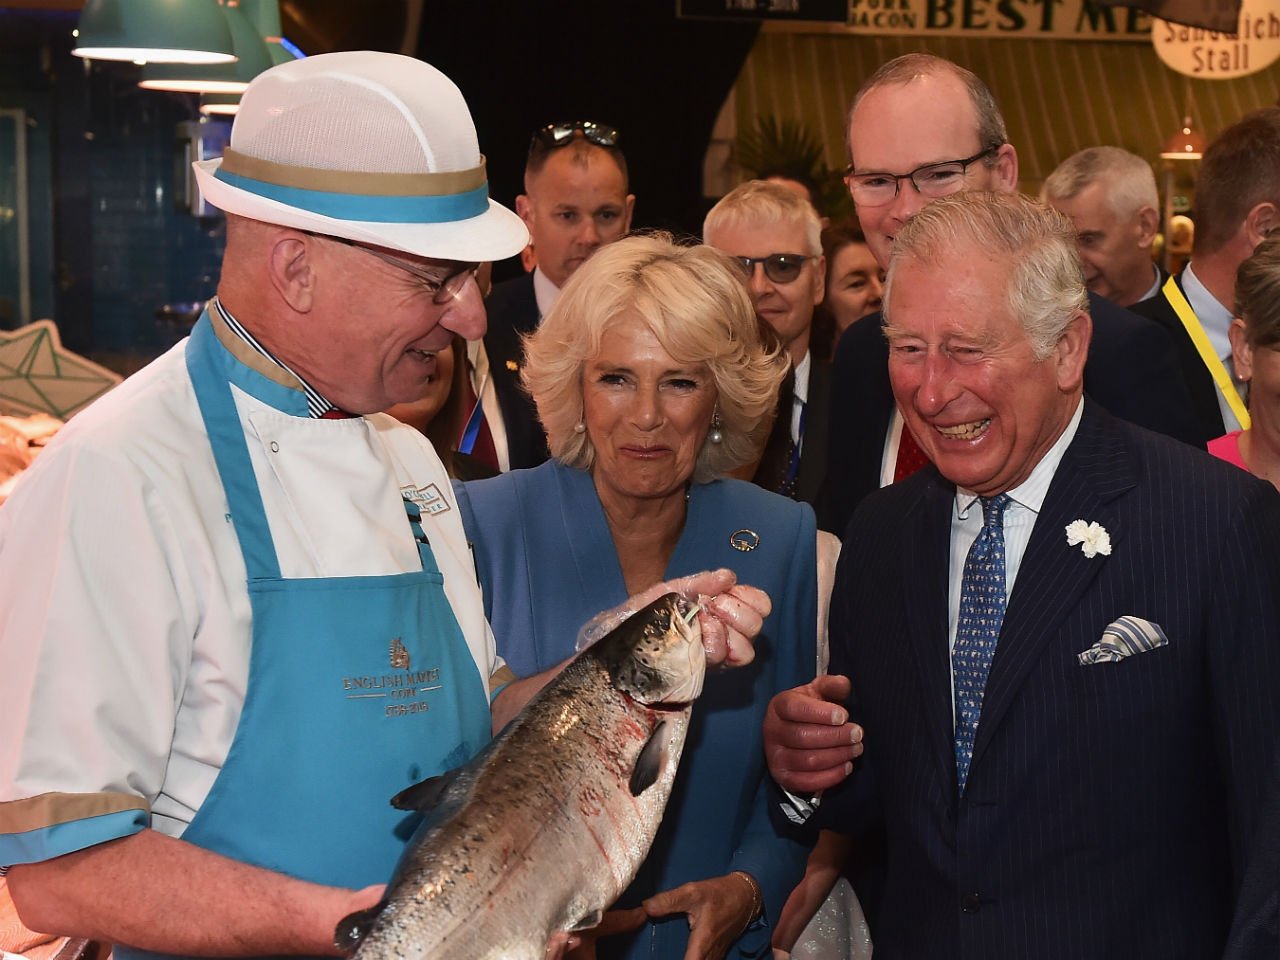 Camilla Dishes On The Food That’s A Strict ‘No-No’ For Royals
